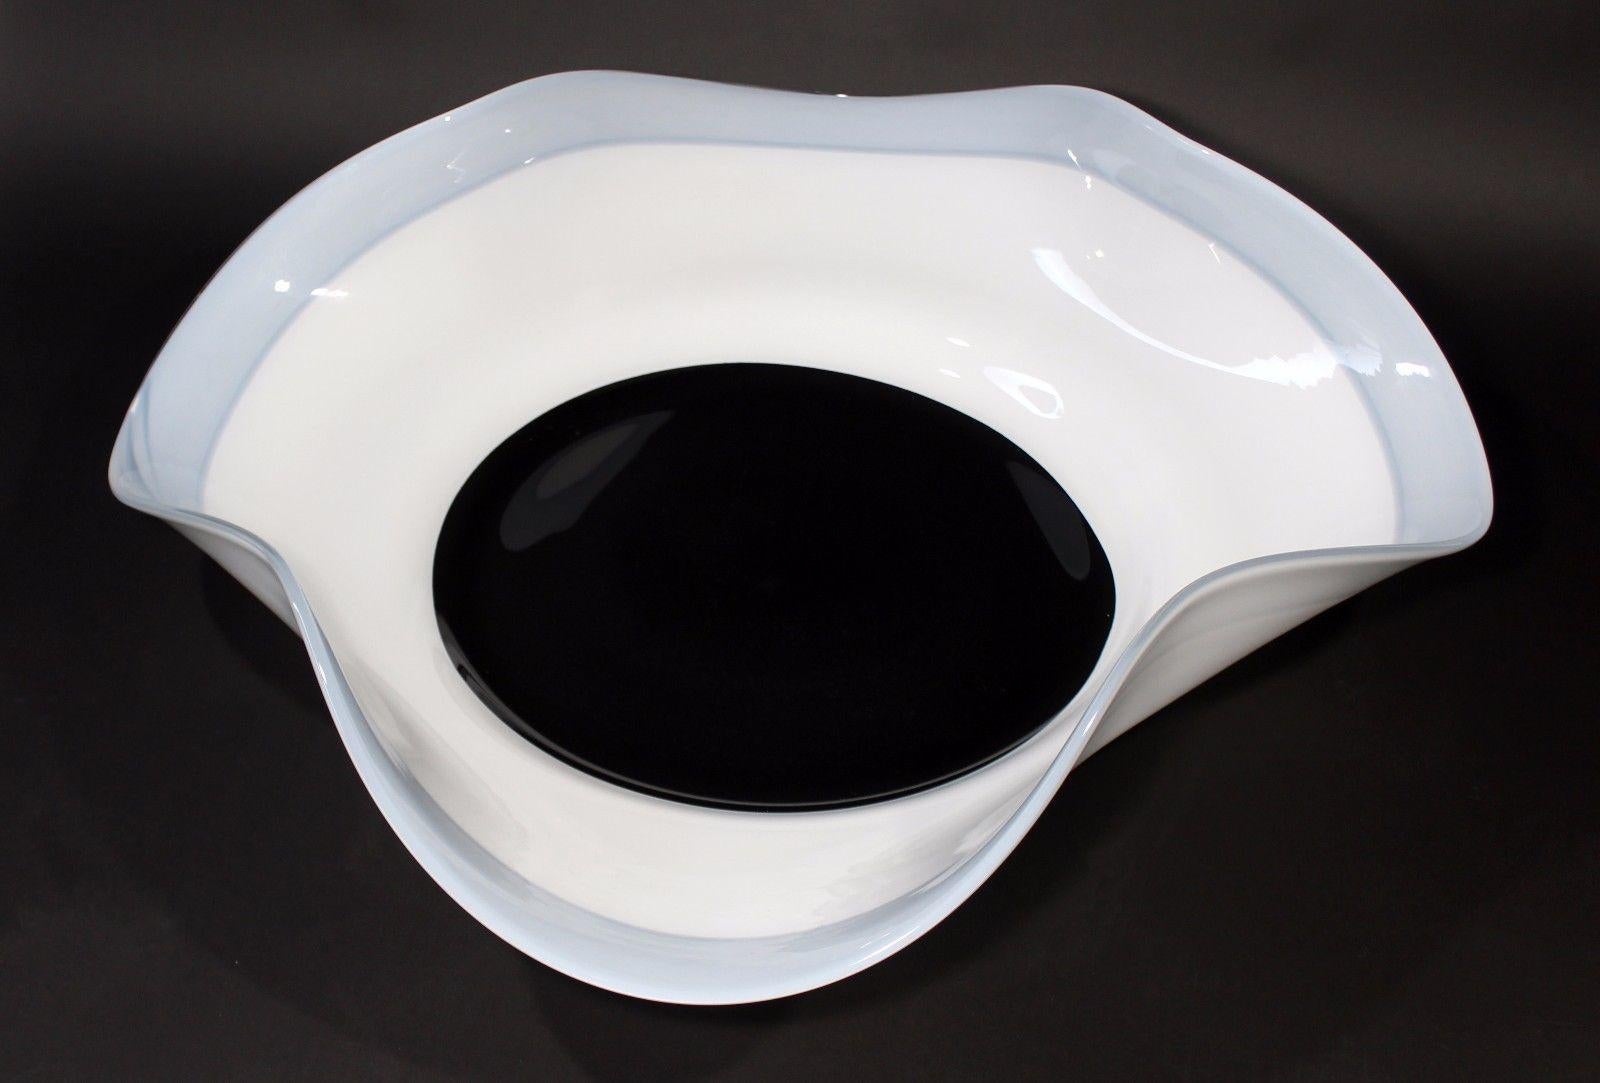 For your consideration is an elegantly large, blue, white and black, Murano, hand blown glass, art bowl from the 1970s. In excellent condition. The dimensions are 32